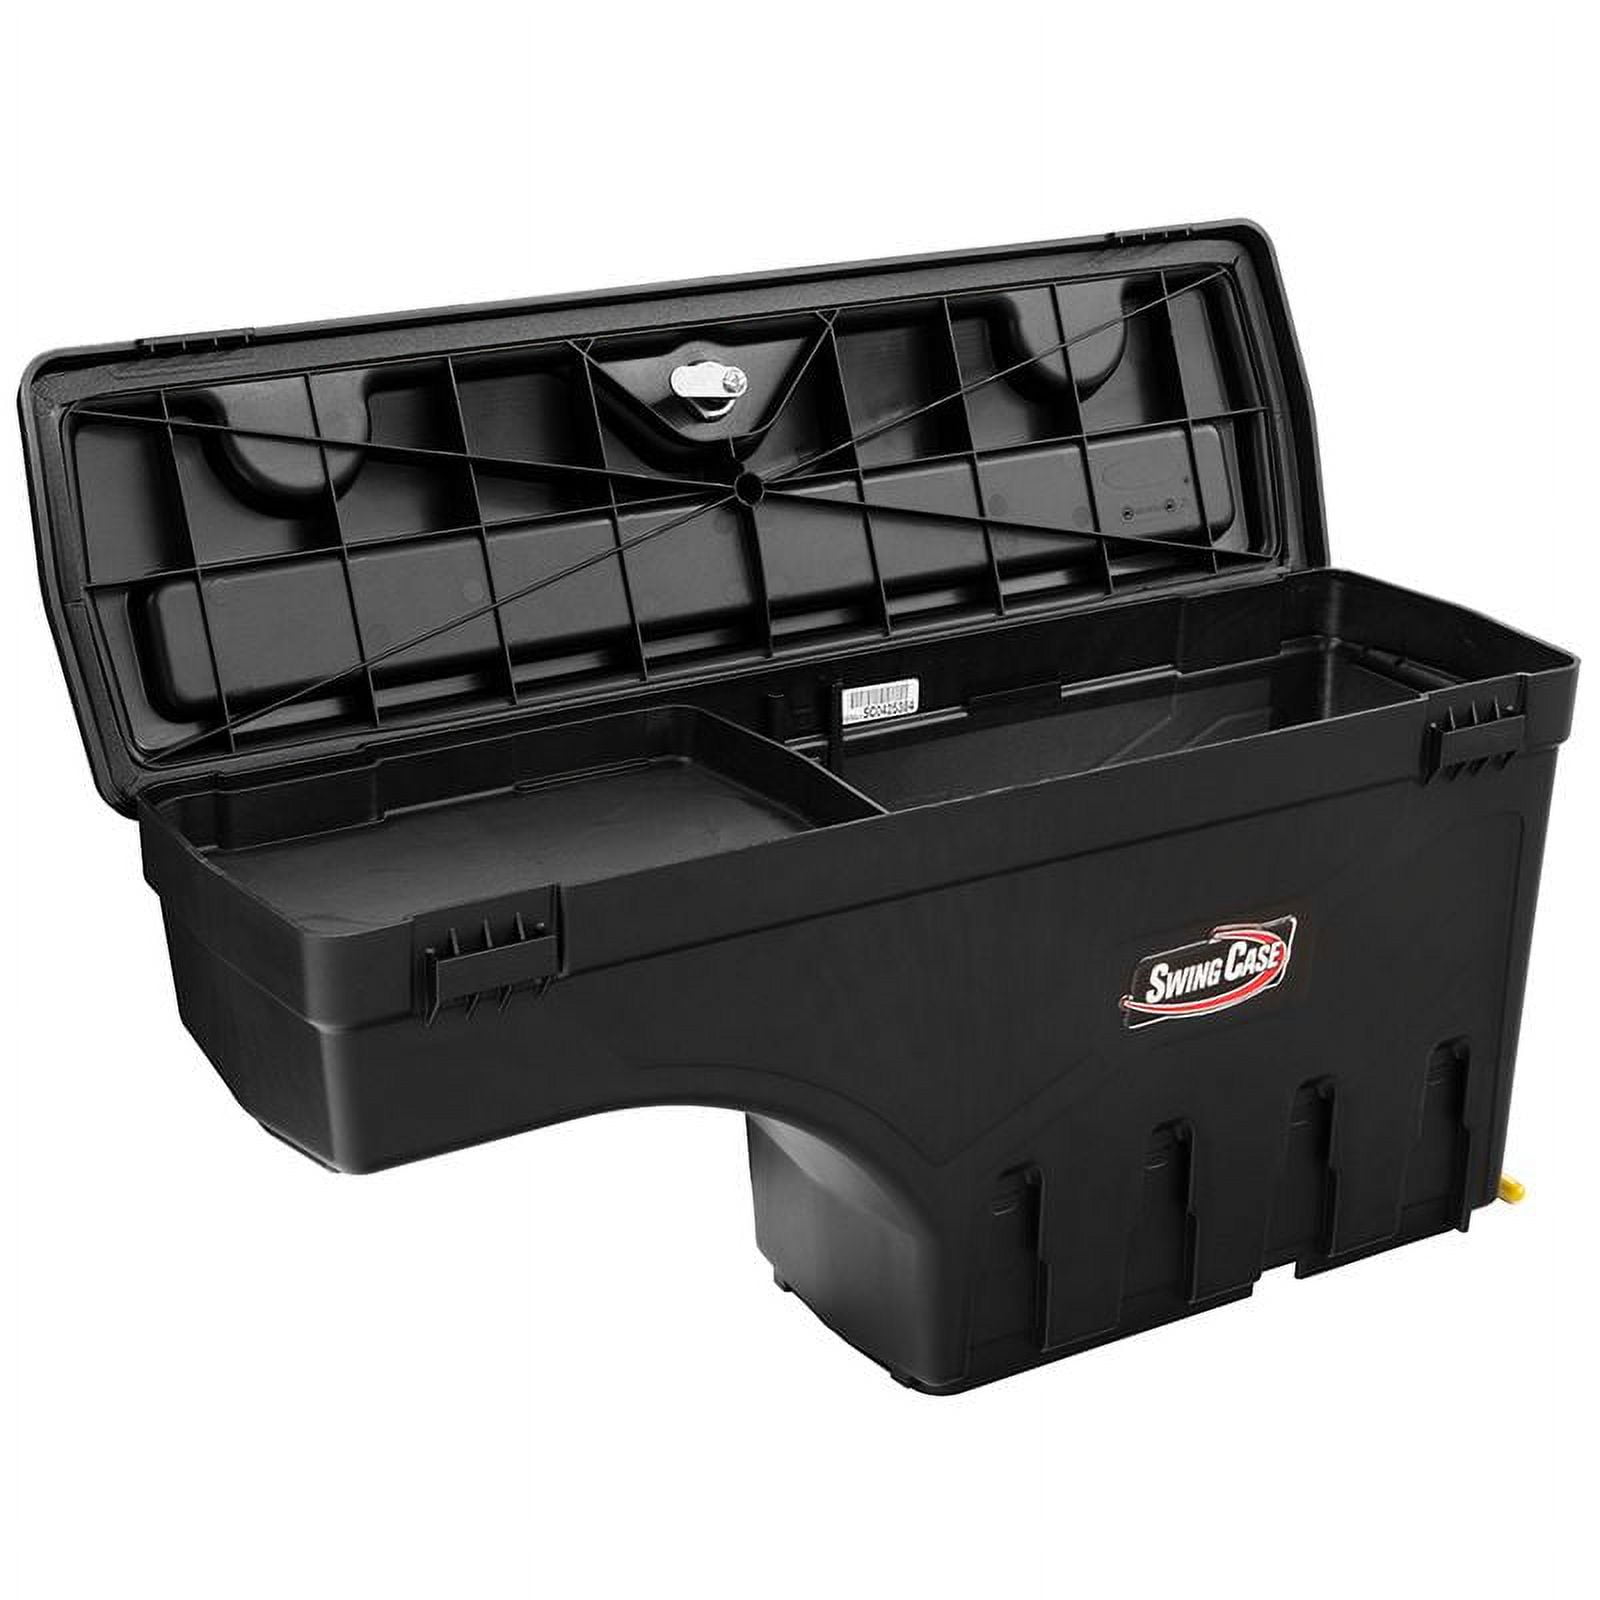 ExcelRC Mini-Z and Micro Car Tool Kit (Black) with Zippered Case